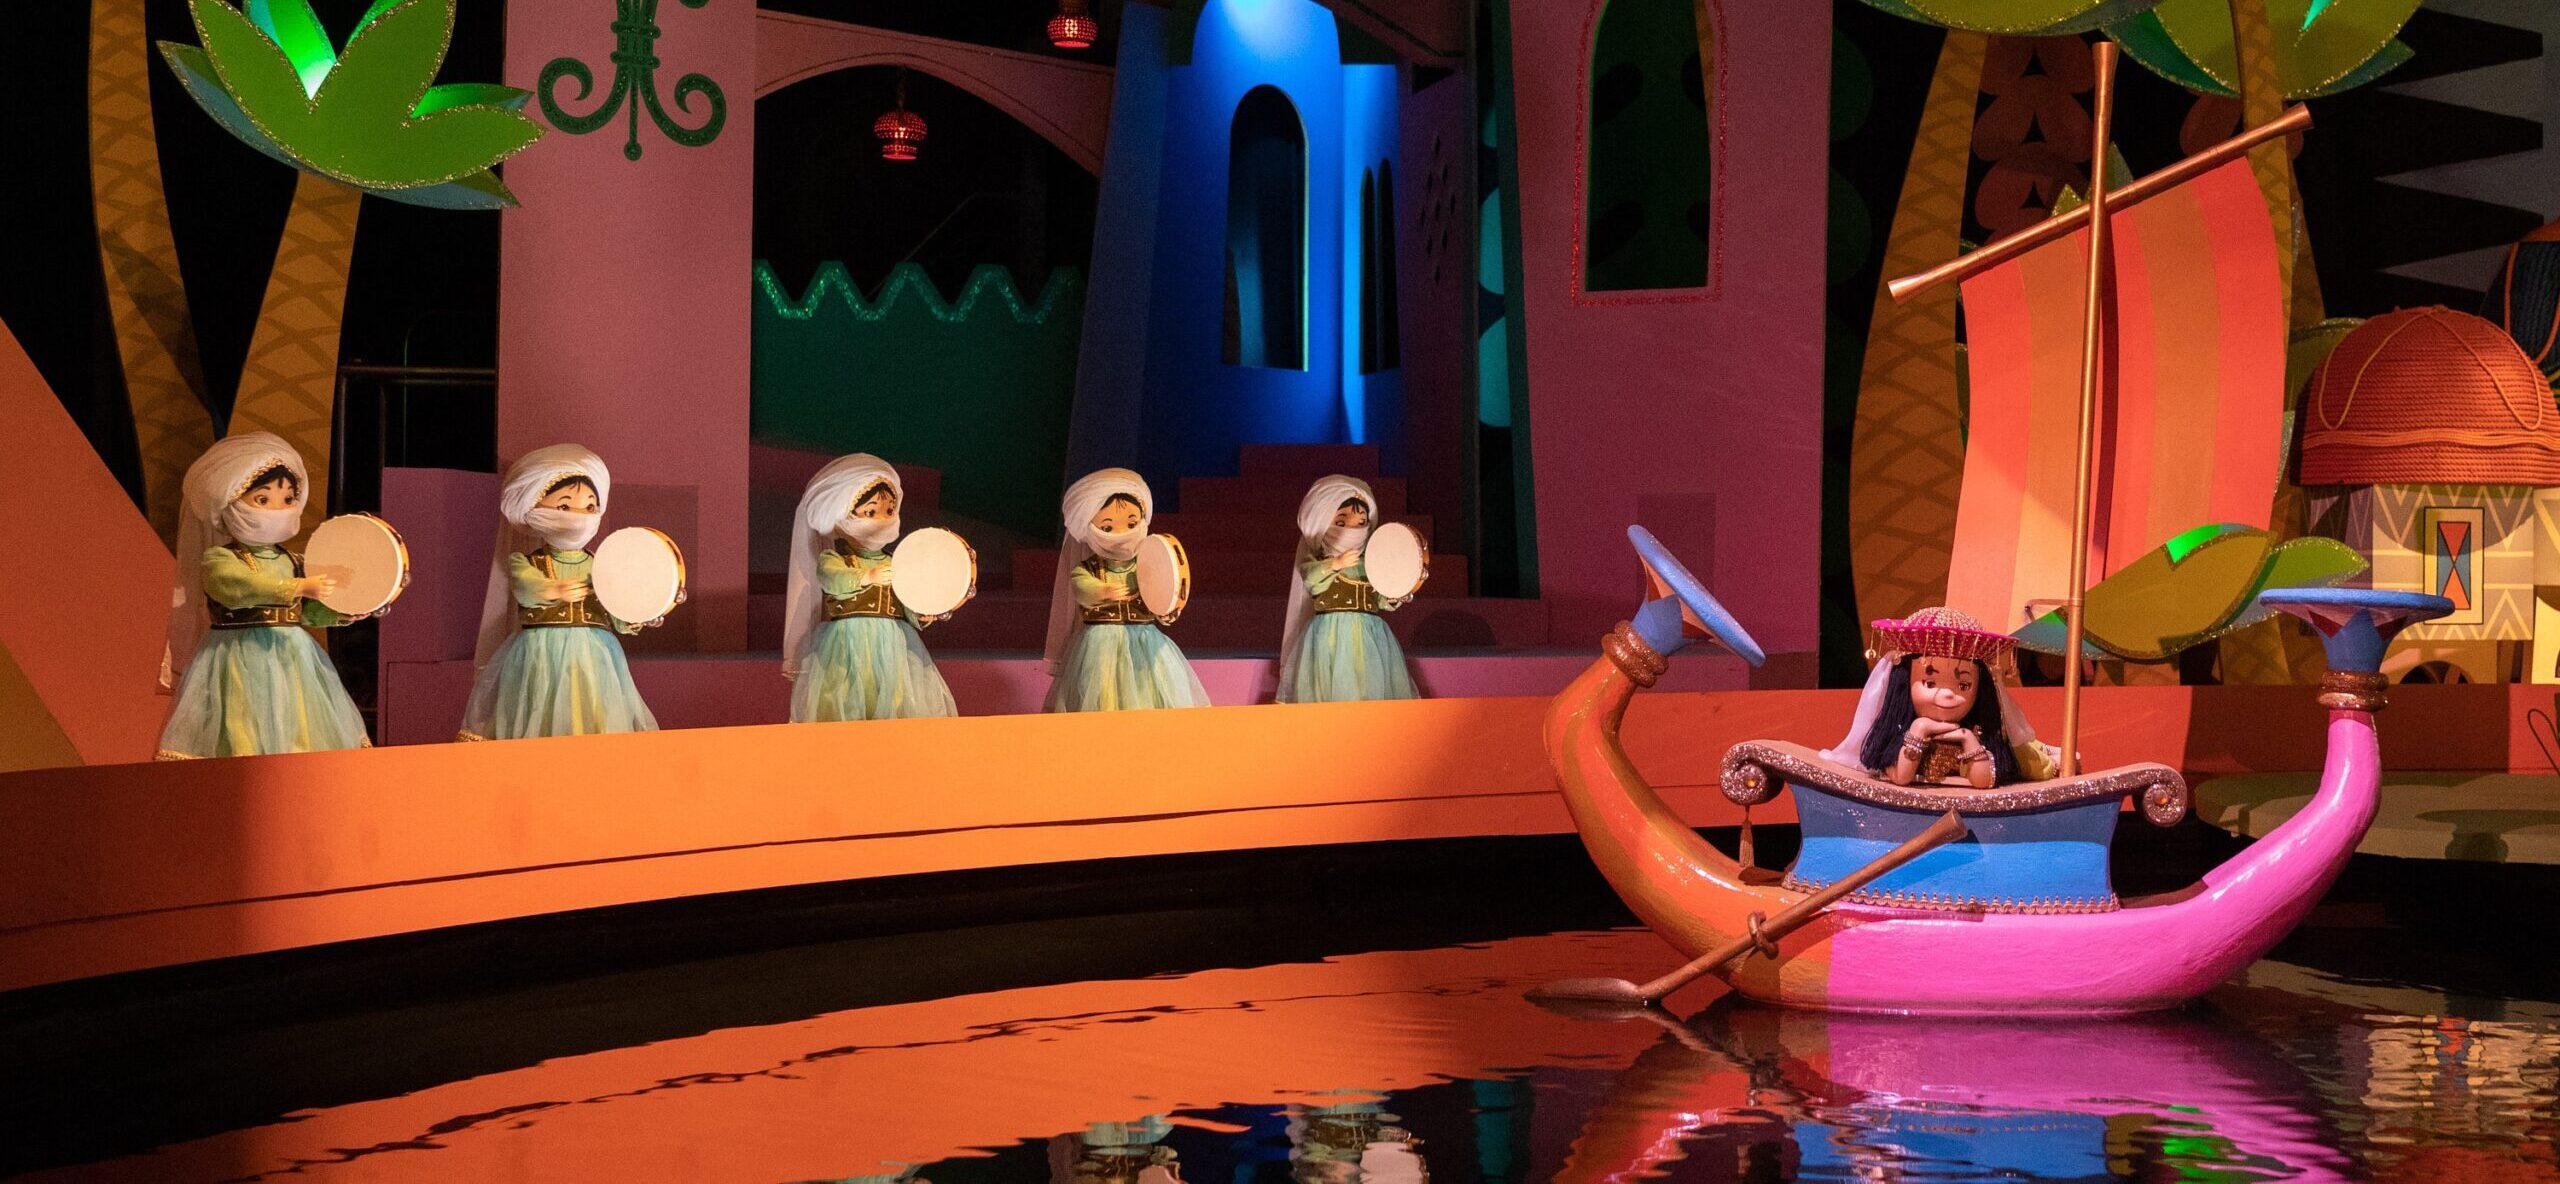 Disney Guest Allows Child To Urinate In ‘It’s A Small World’ Water